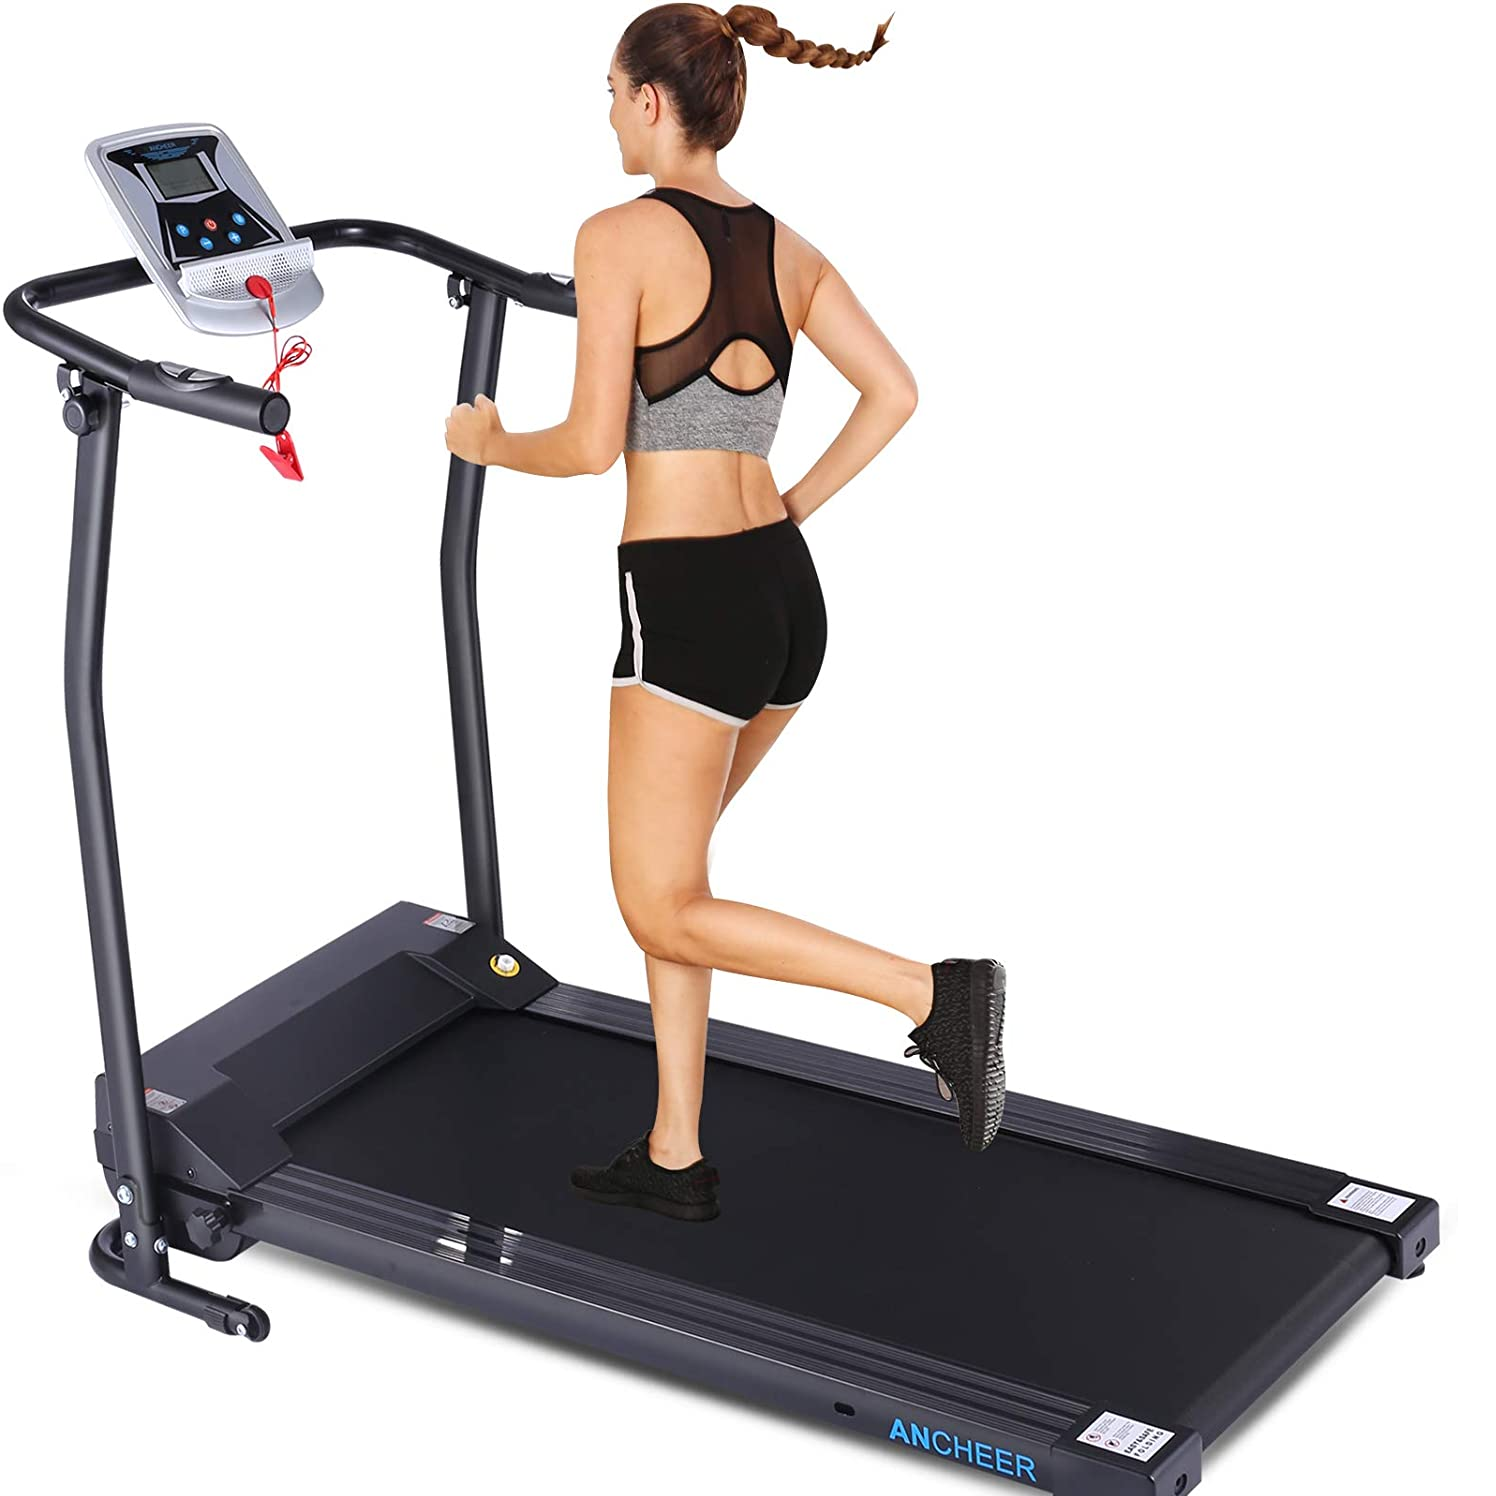 ANCHEER Folding Treadmill Only $239.99! (Reg $624) - Pinching Your Pennies